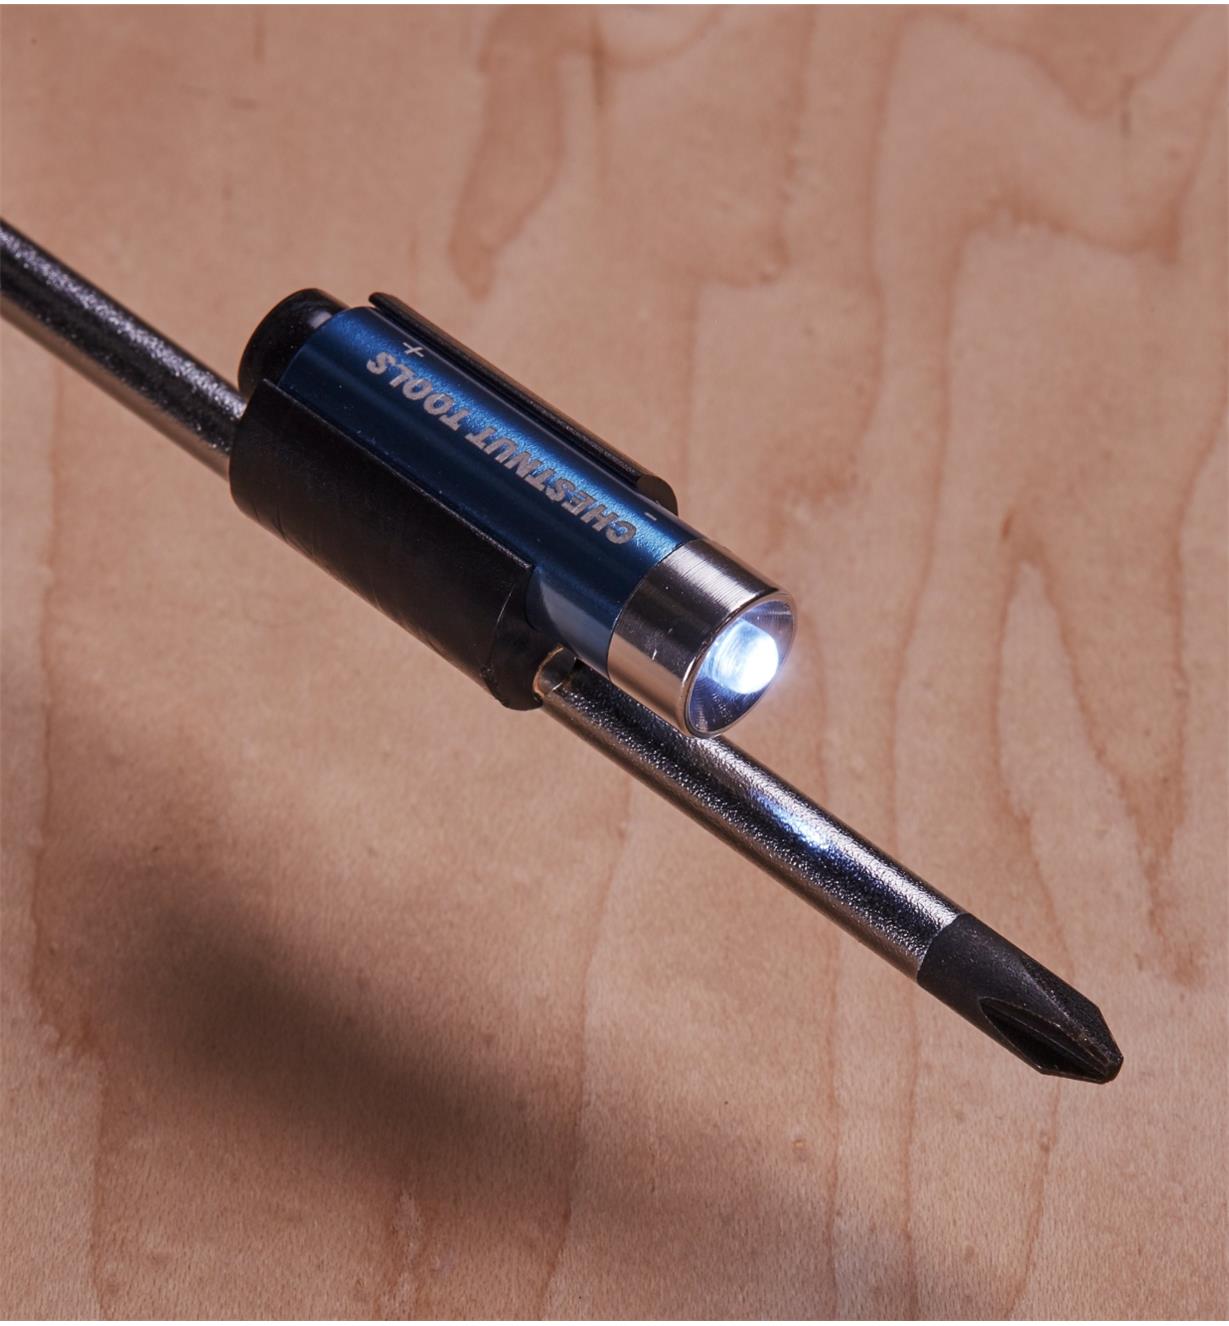 Magnetic LED Tool Light attached to a screwdriver shaft